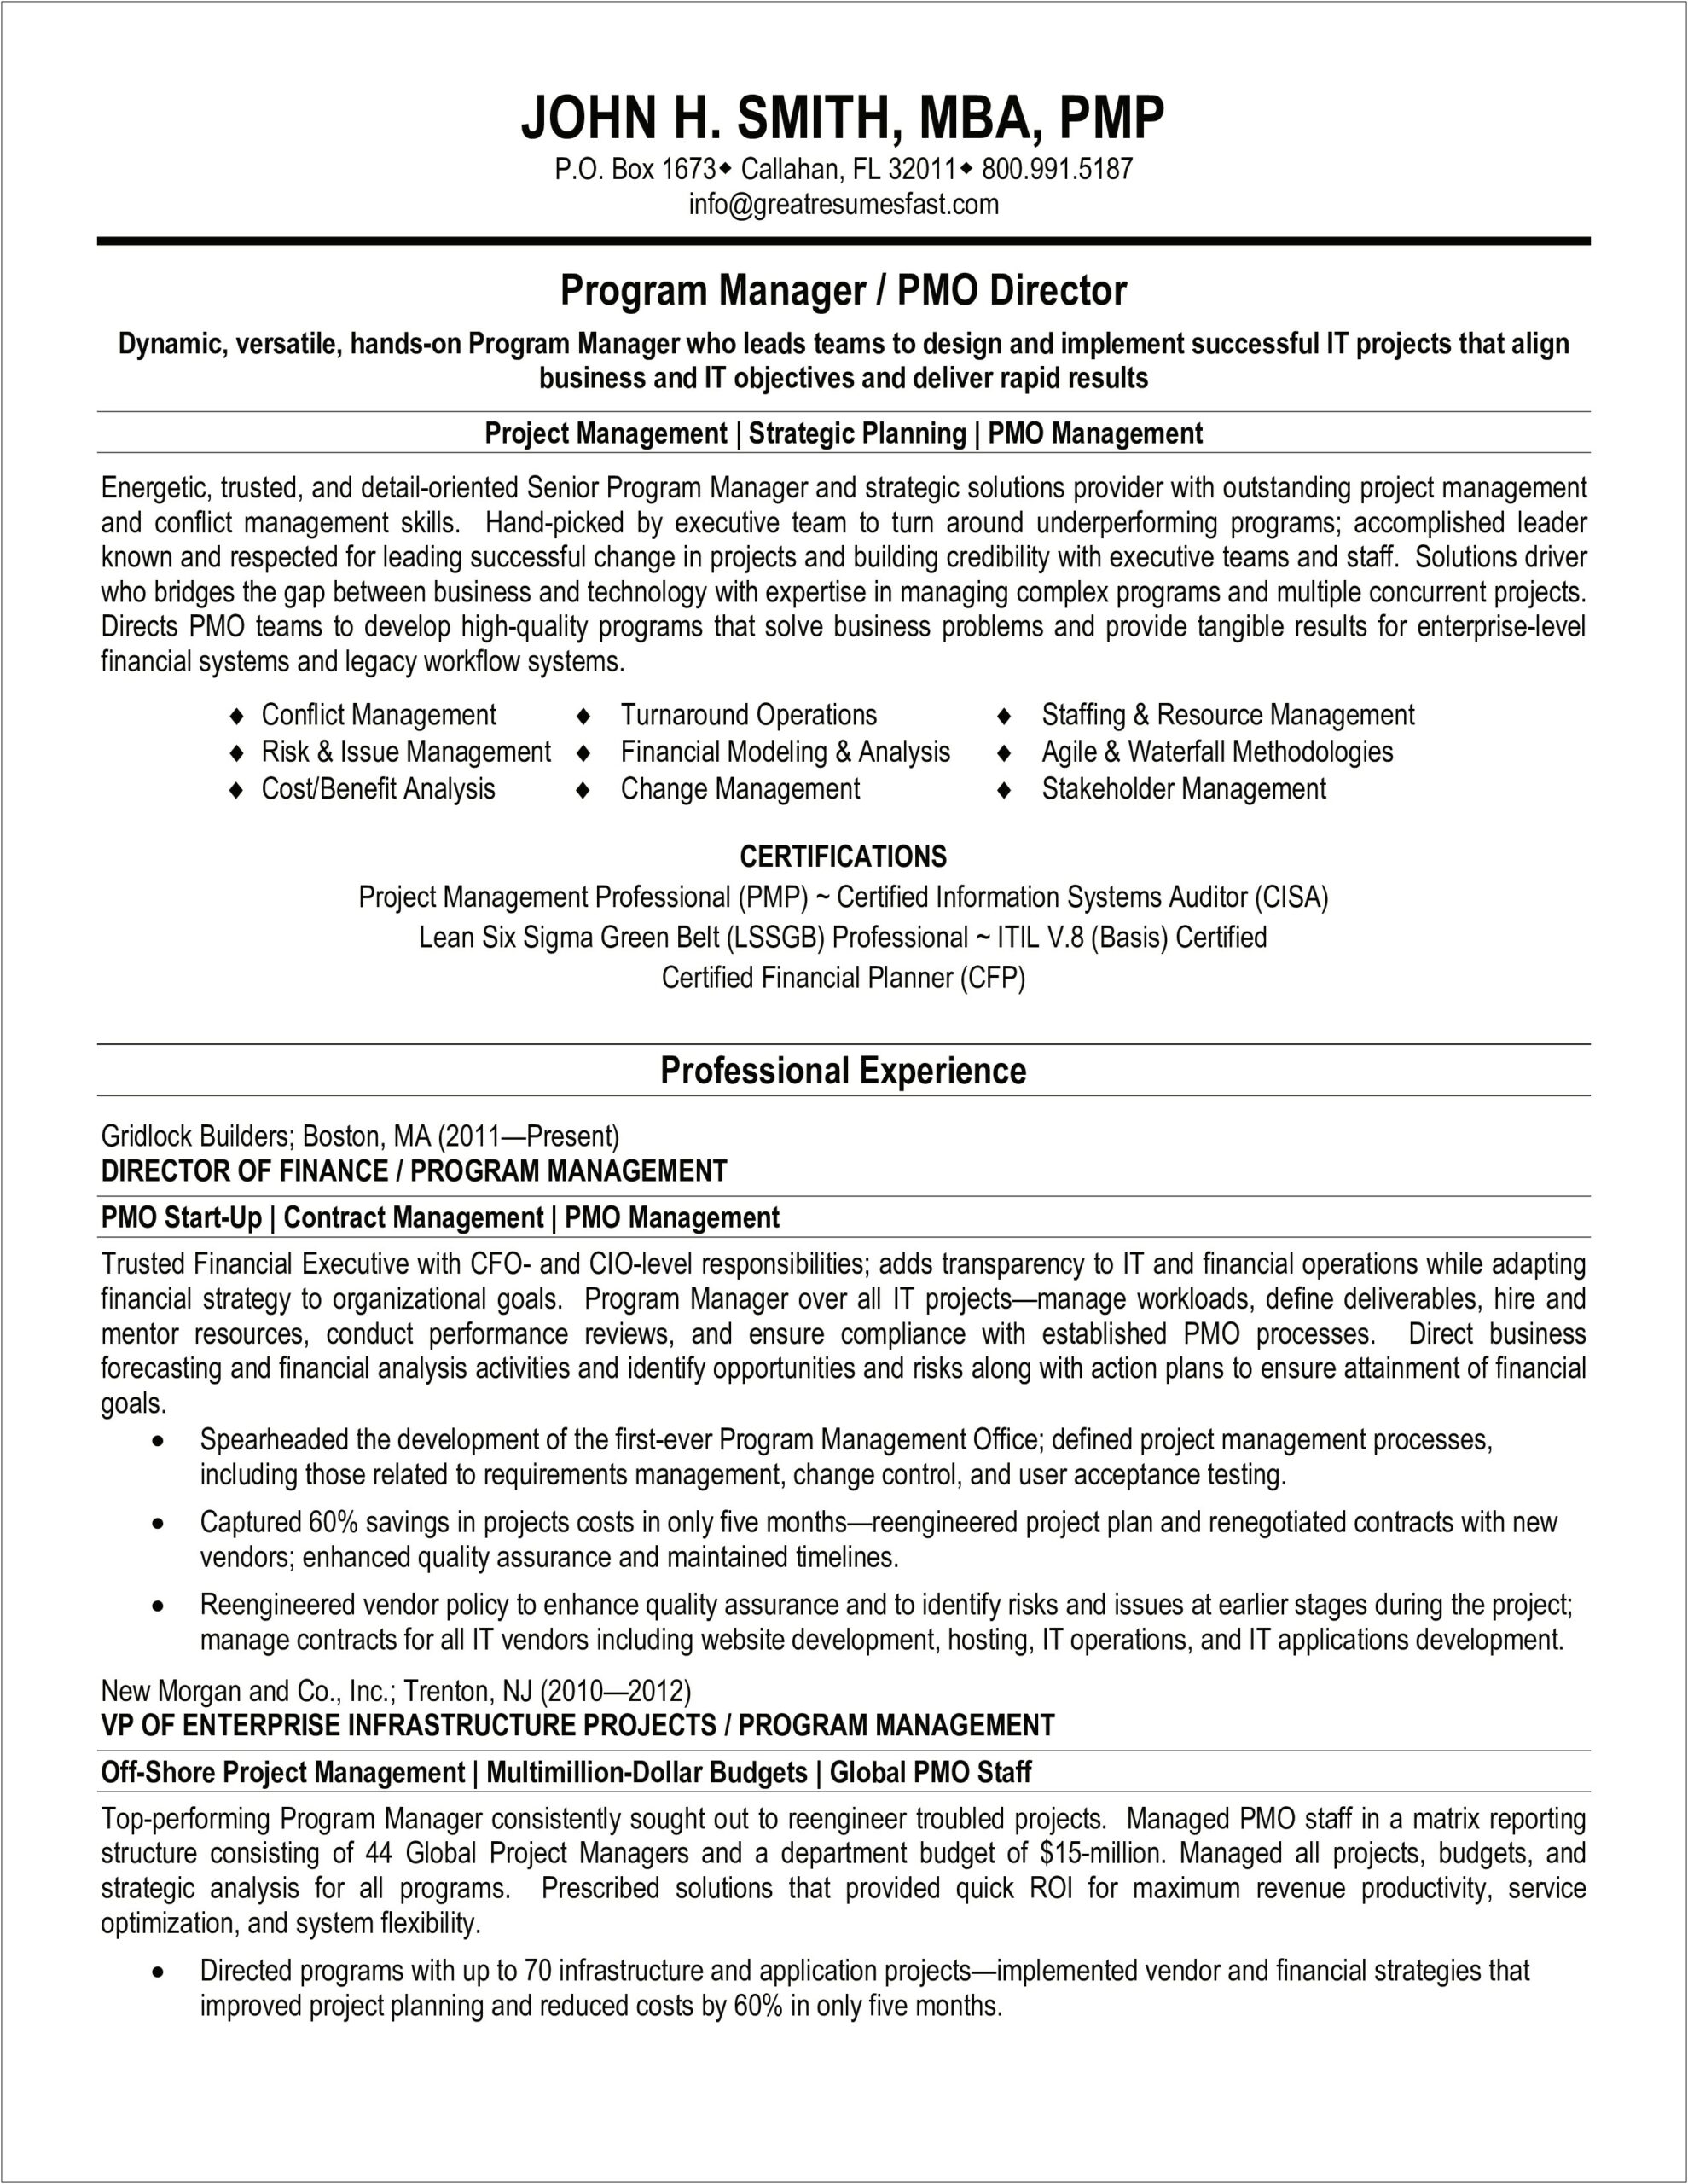 Lean Six Sigma Resume With No Experience